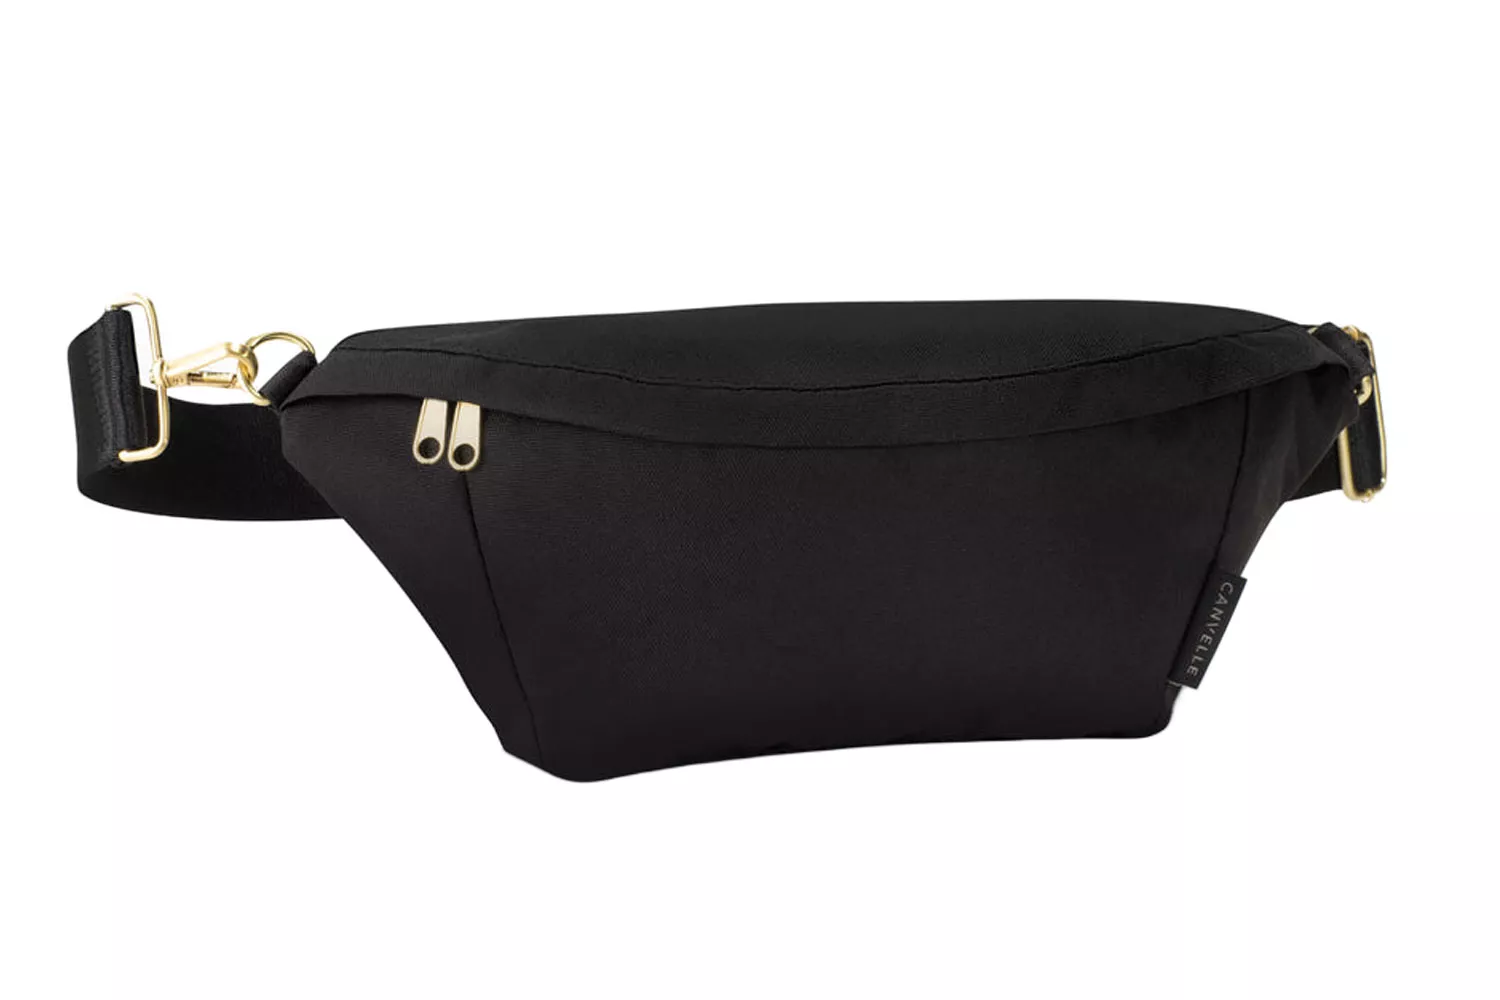 The Best Crossbody Bags for Moms: Canvelle Fanny Pack